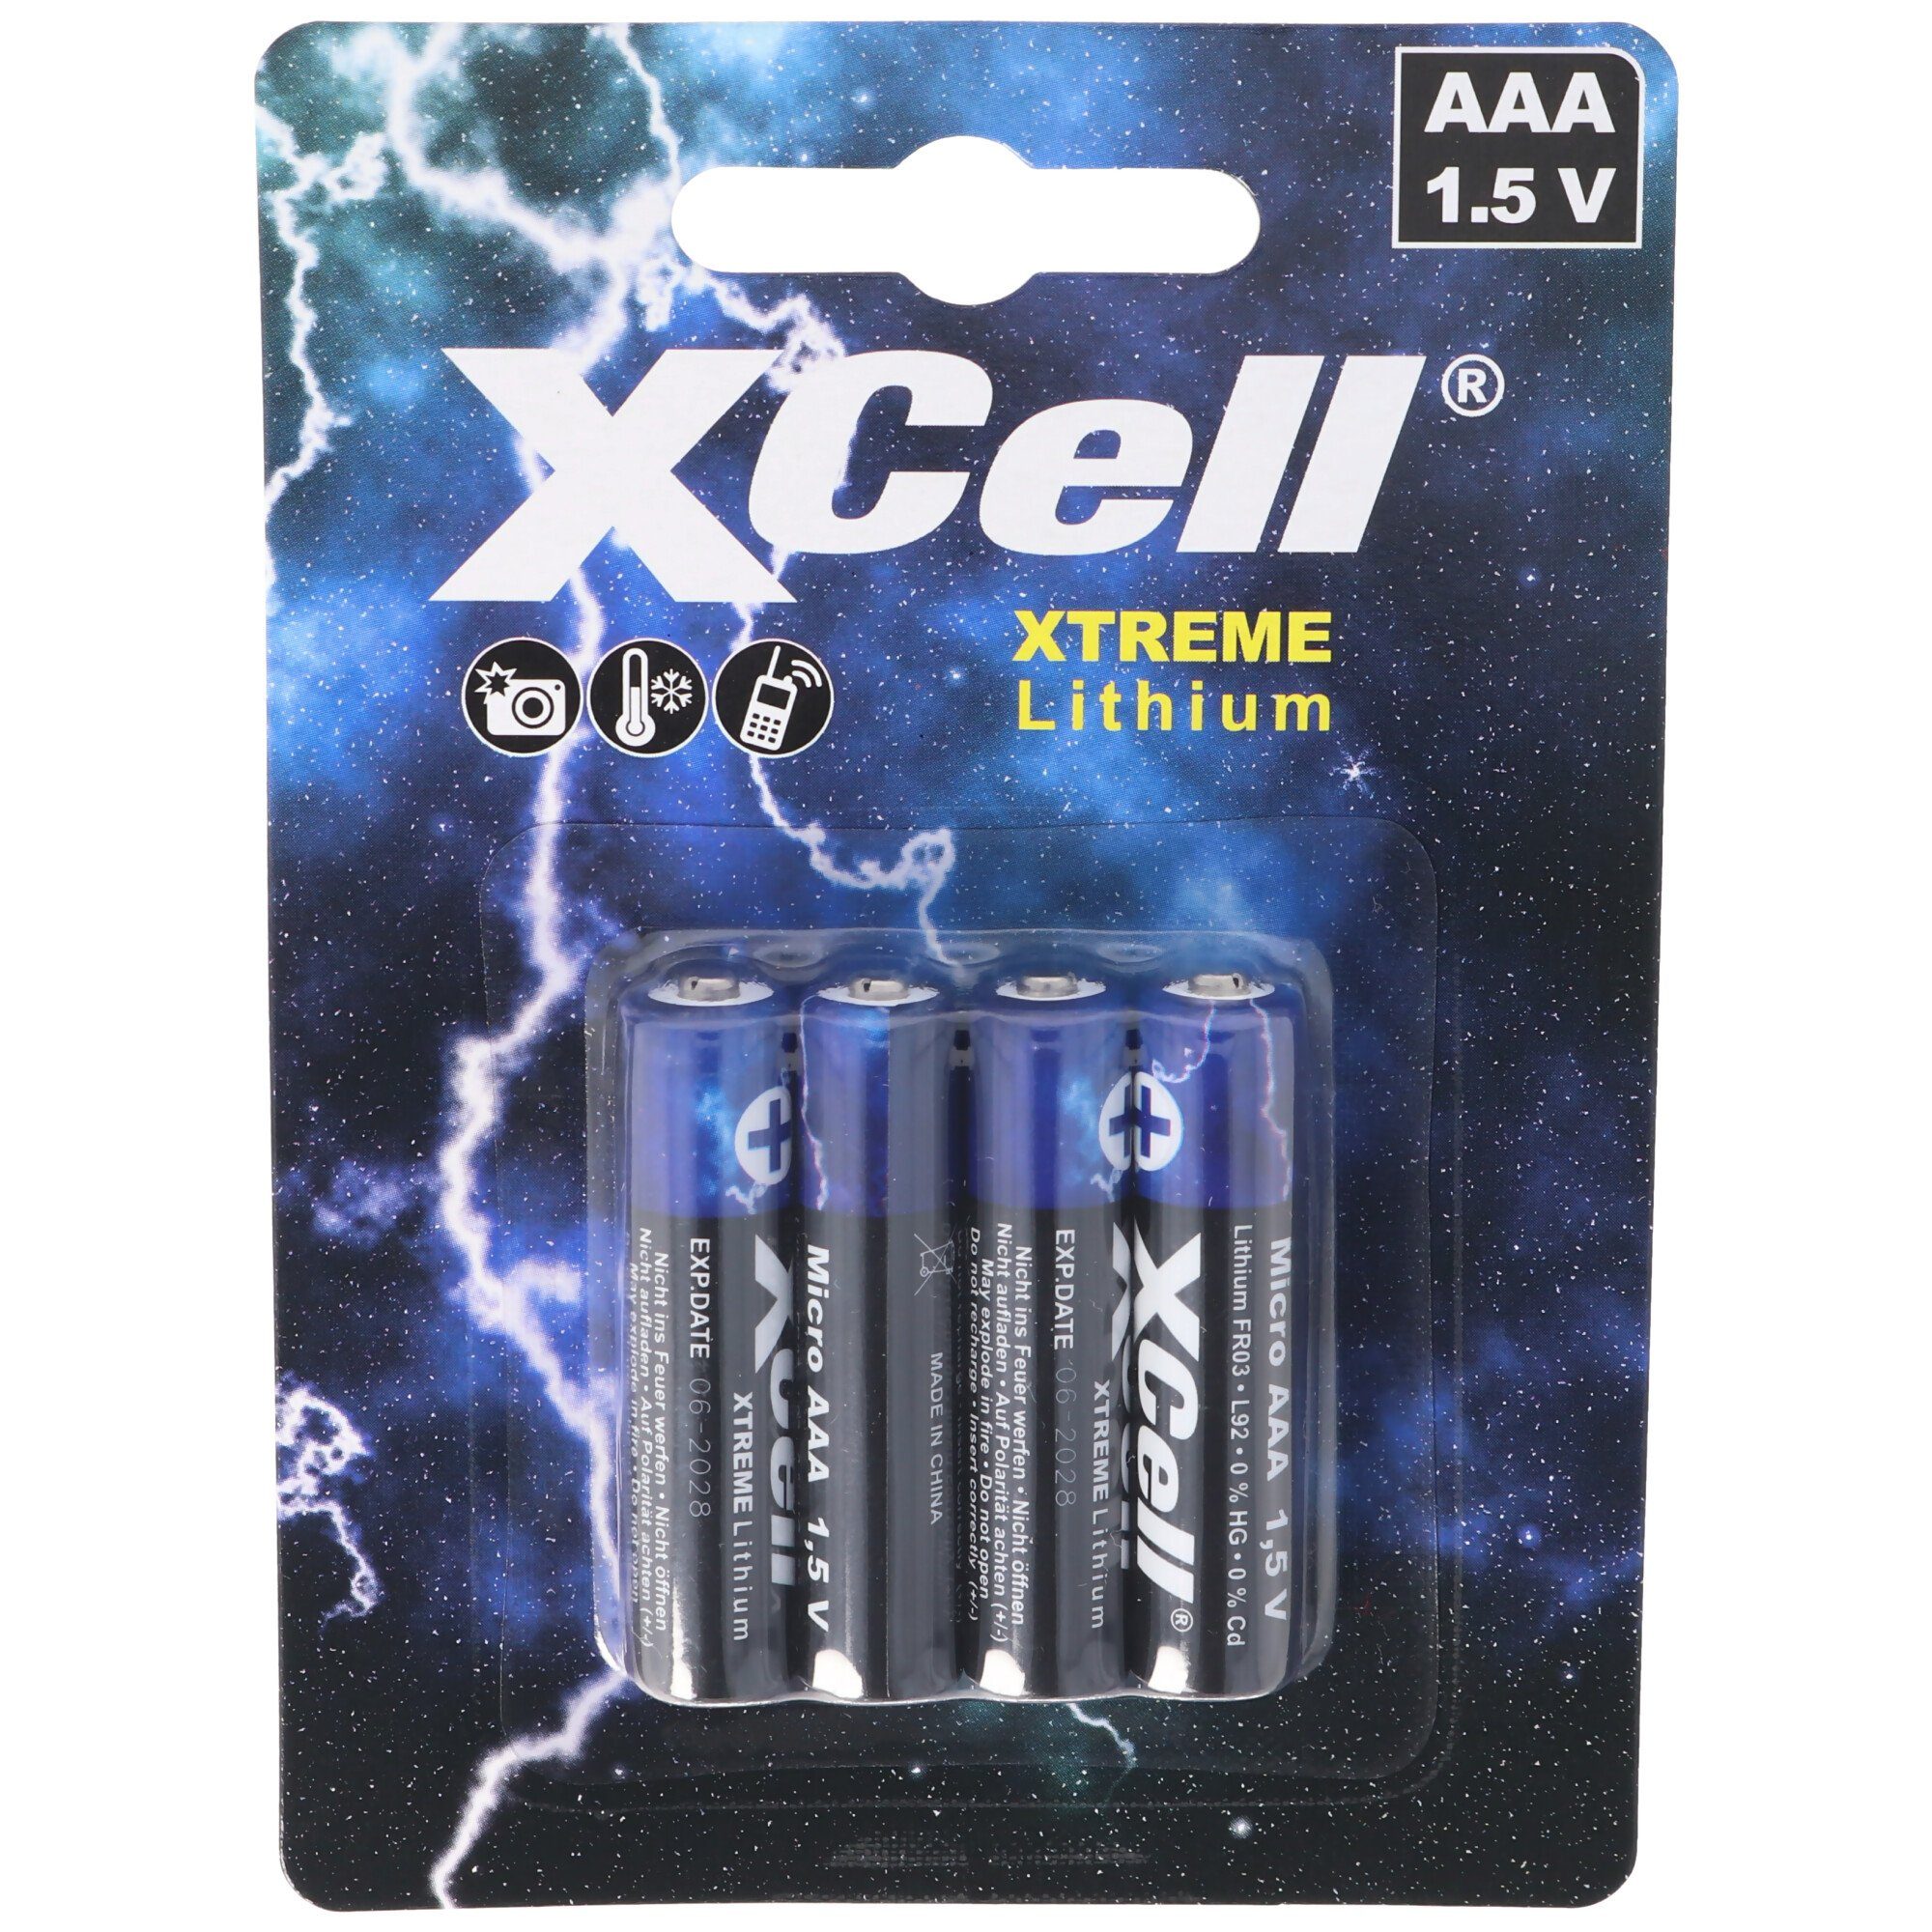 XCell AAA, Micro Lithium XTREME Batterie, (1,5 1,5V 4 V) FR03, Batterie Batterie, Lithium L92